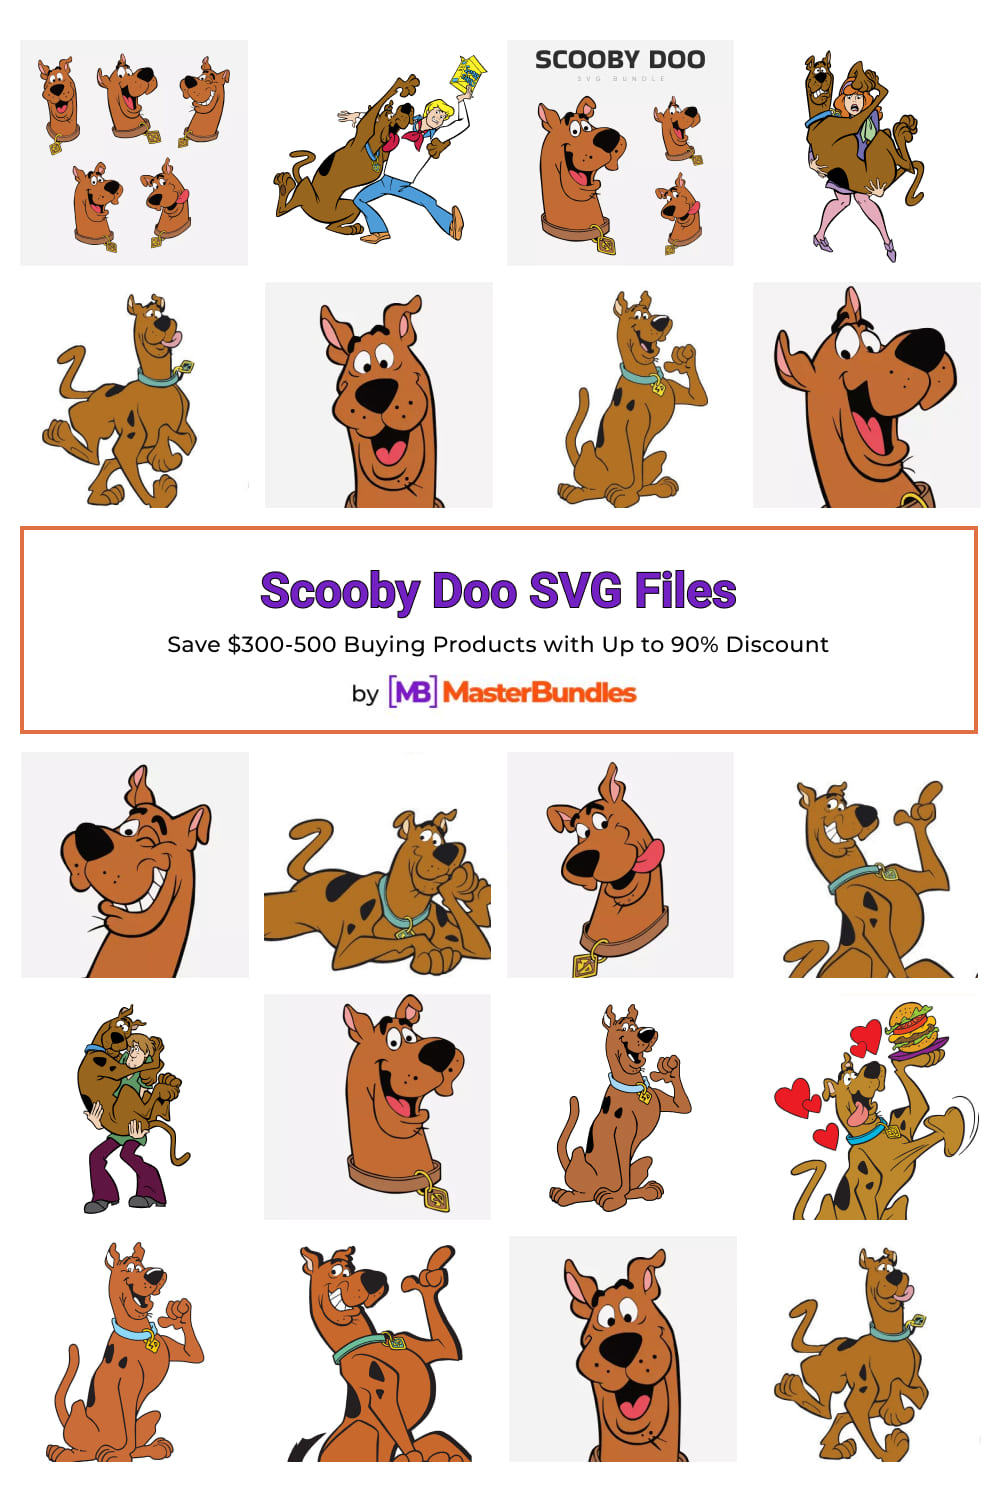 Scooby Doo SVG Files for pinterest.